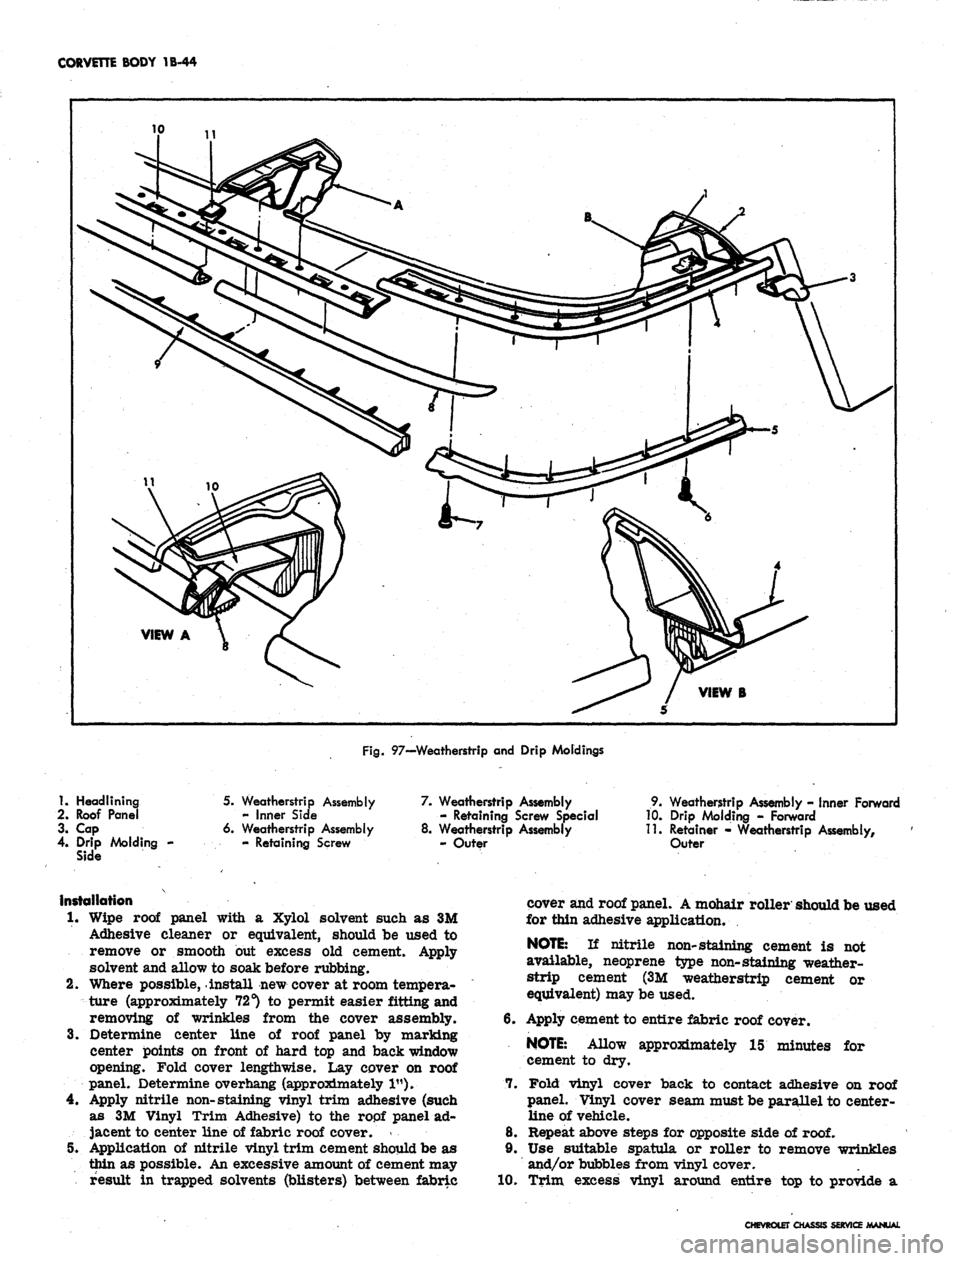 CHEVROLET CAMARO 1967 1.G Chassis Workshop Manual 
CORVETTE BODY 1B-44

VIEW A

VIEW B

Fig.
 97—Weatherstrip and Drip Moldings

1.
 Headlining

2.
 Roof Panel

3. Cap

4.
 Drip Molding -

Side 
5. Weatherstrip Assembly

- Inner Side

6. Weatherstr